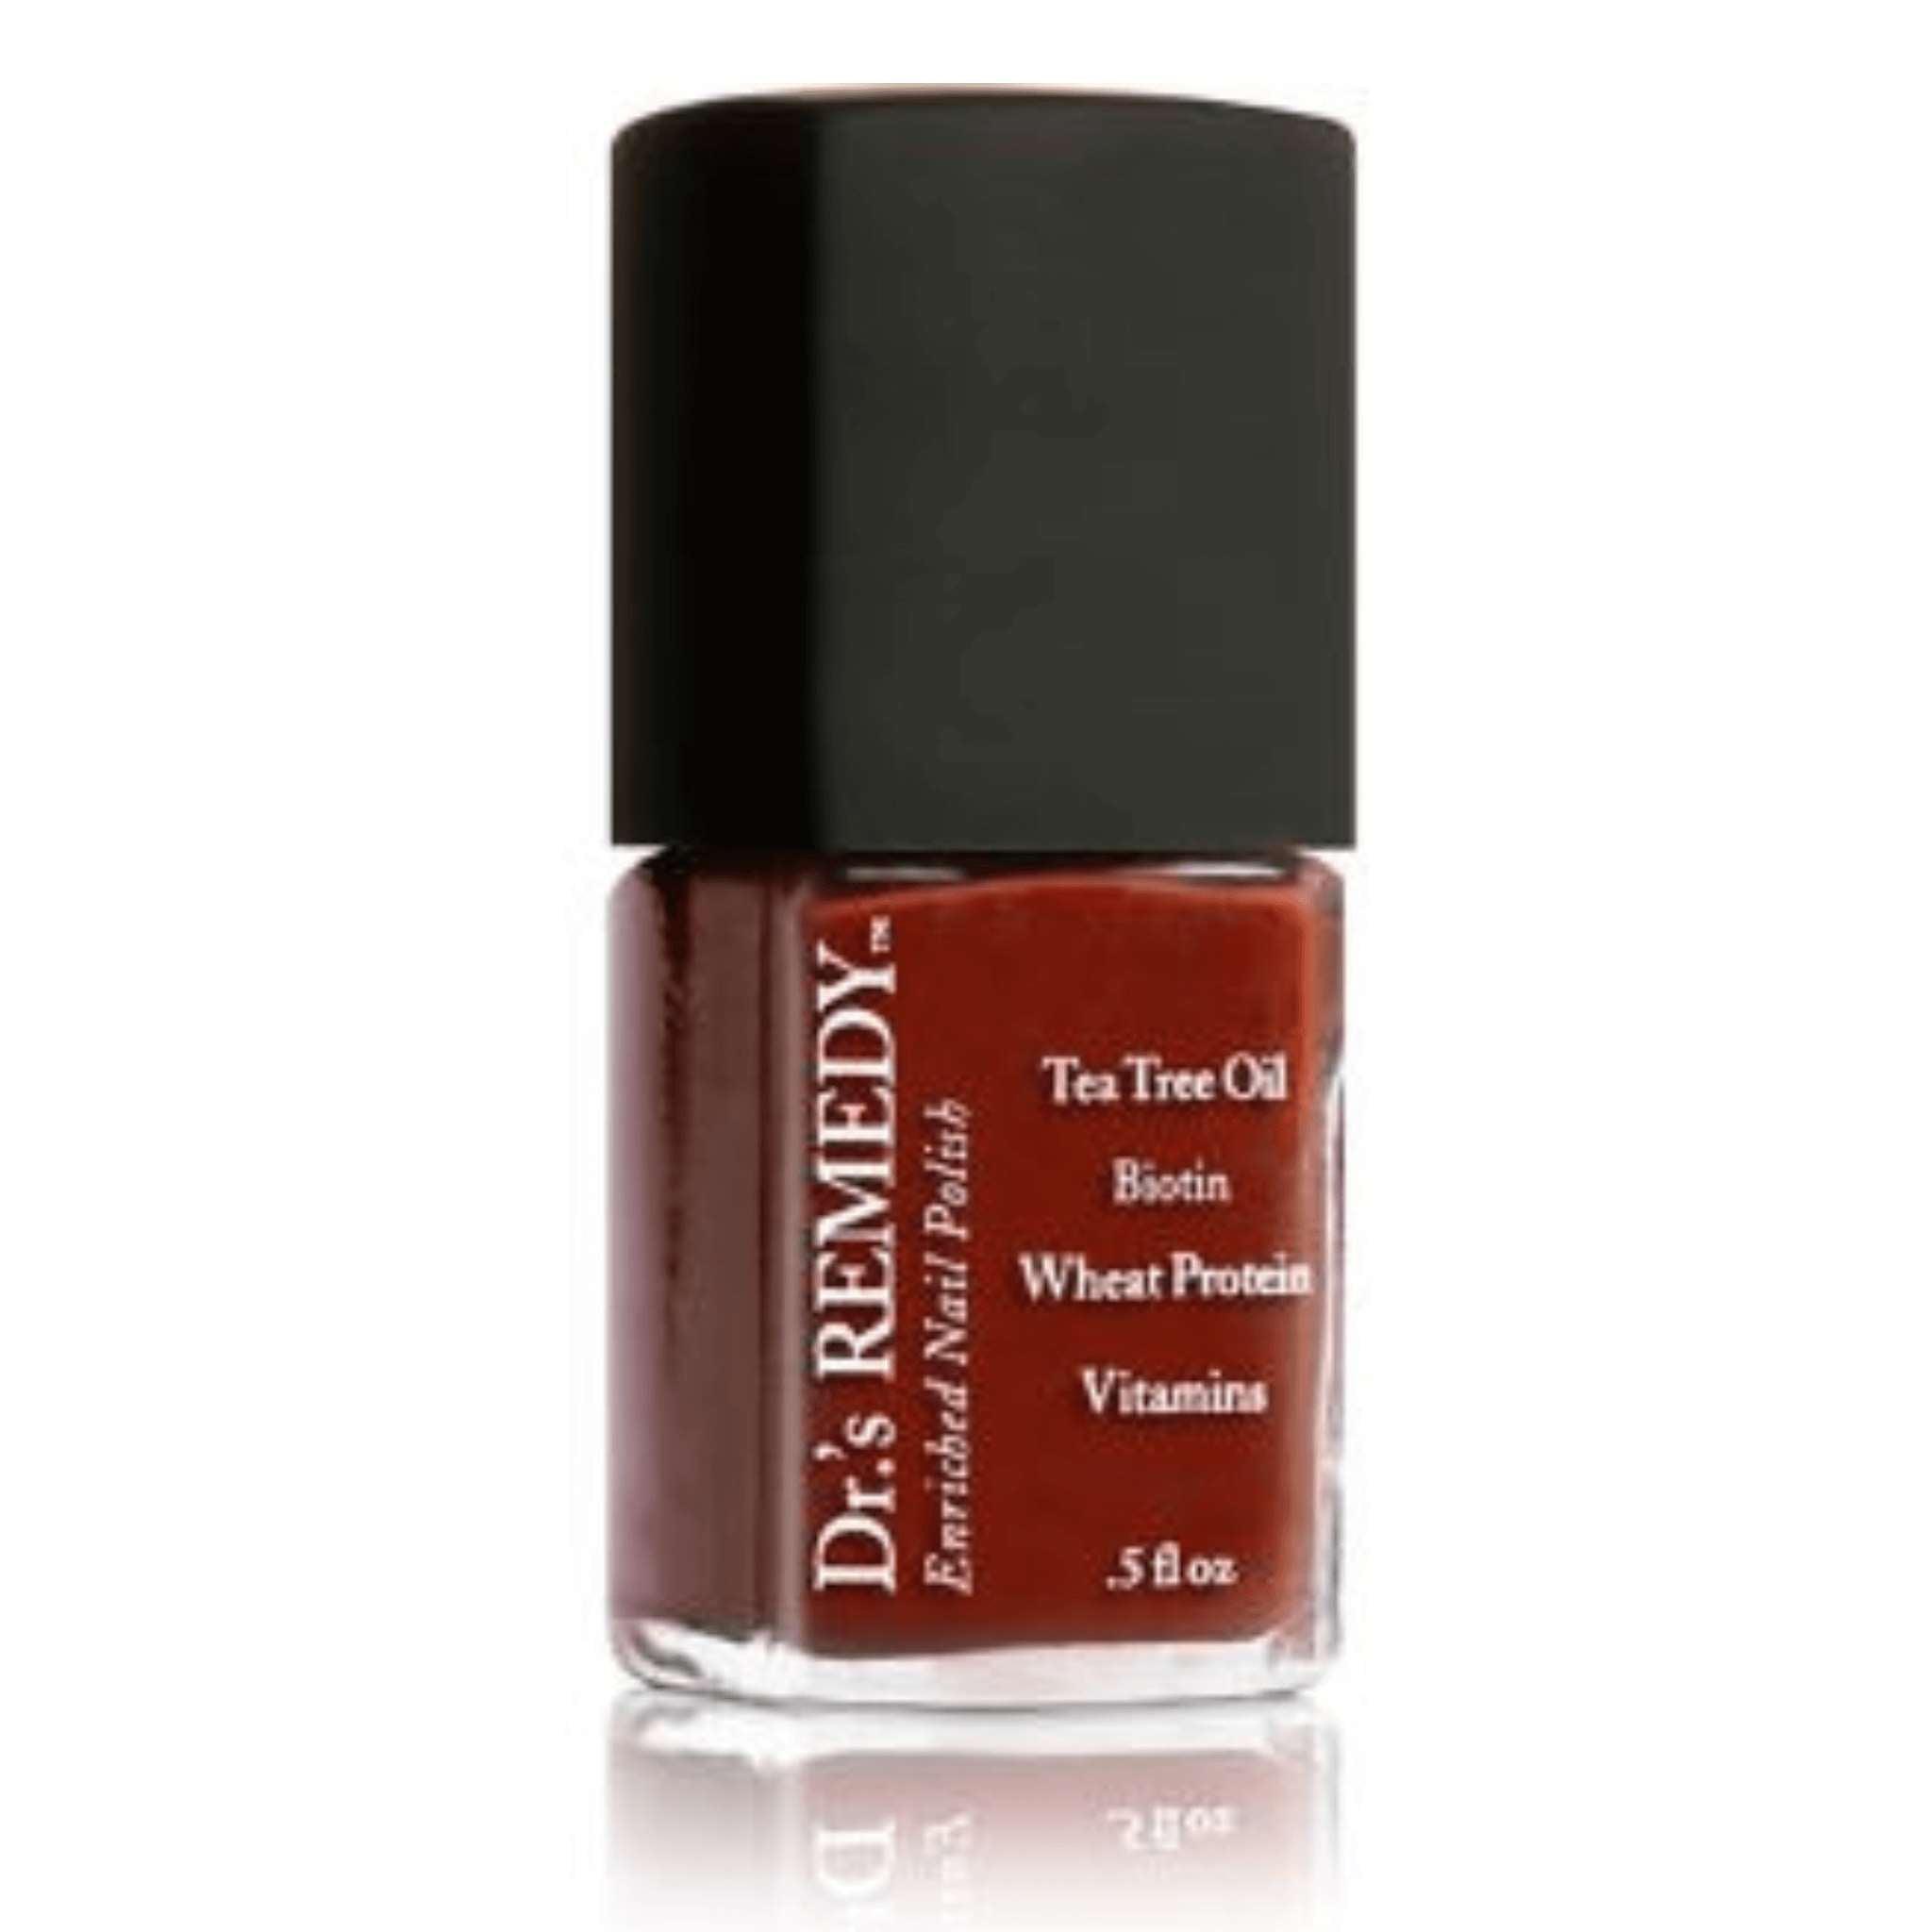 Dr.'s REMEDY Enriched Nail Polish / RELIABLE Rustic Red (creme) 15ml